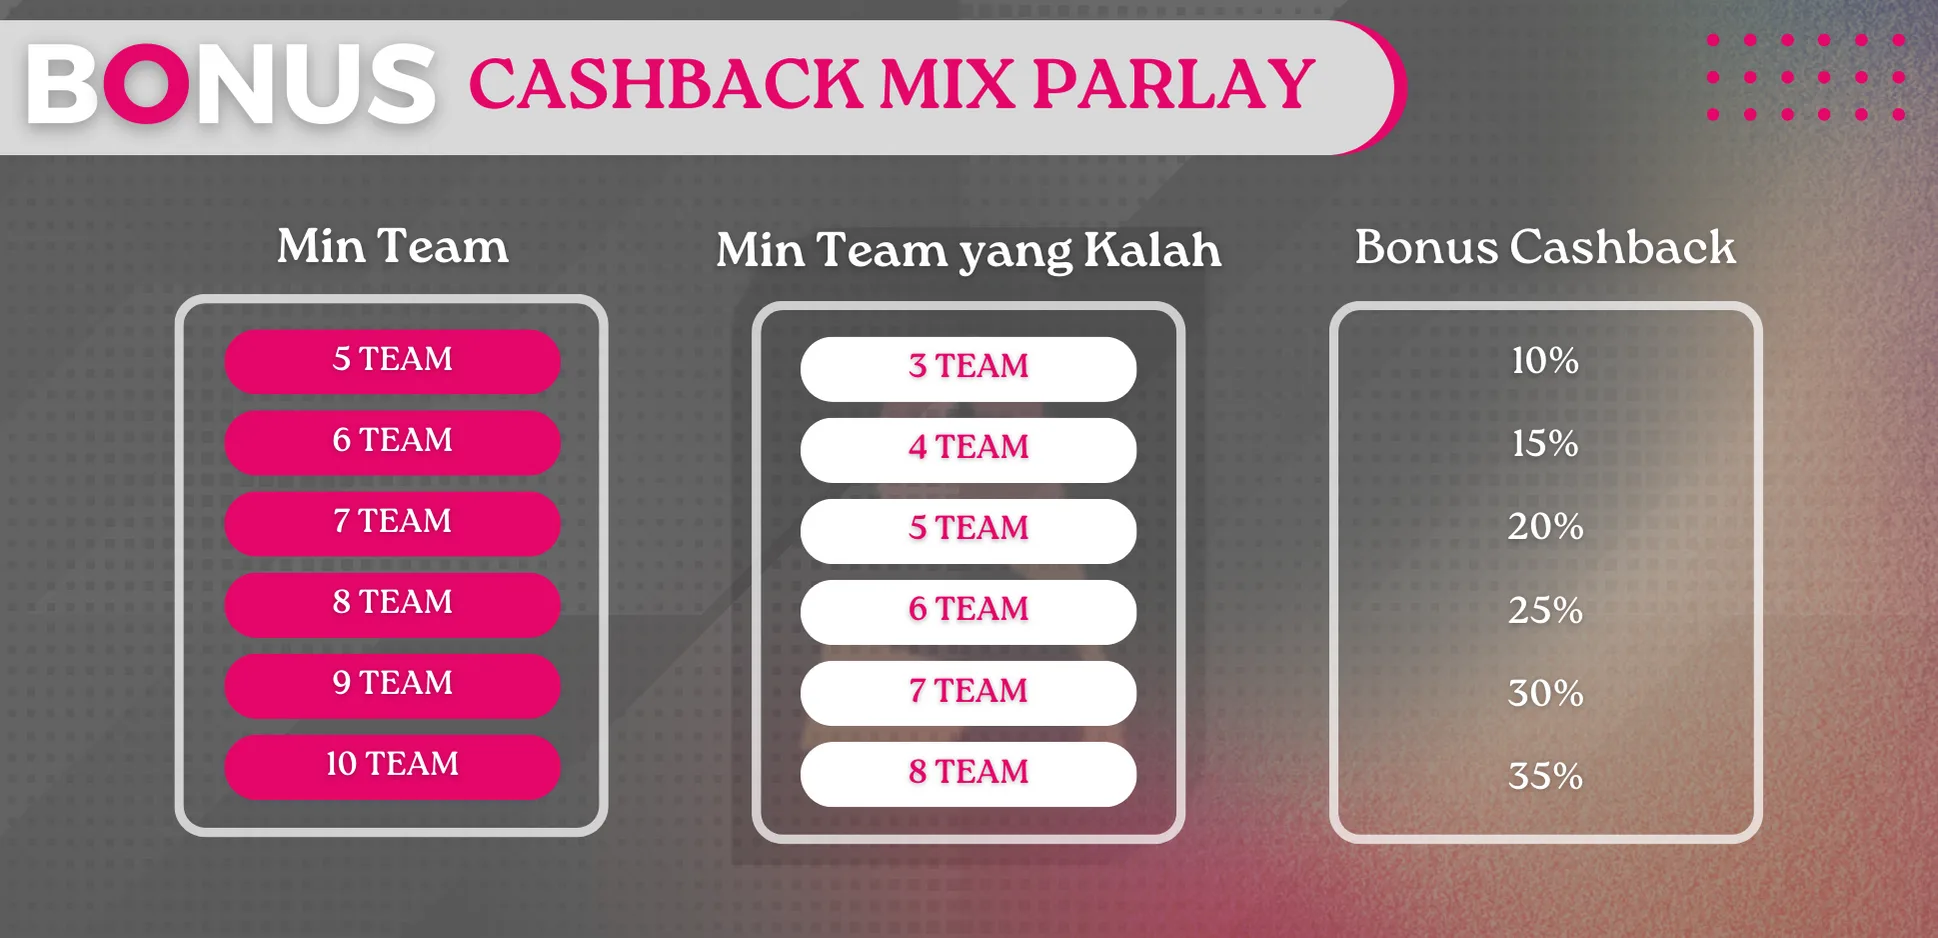 CASHBACK MIX PARLAY UP TO 35% 